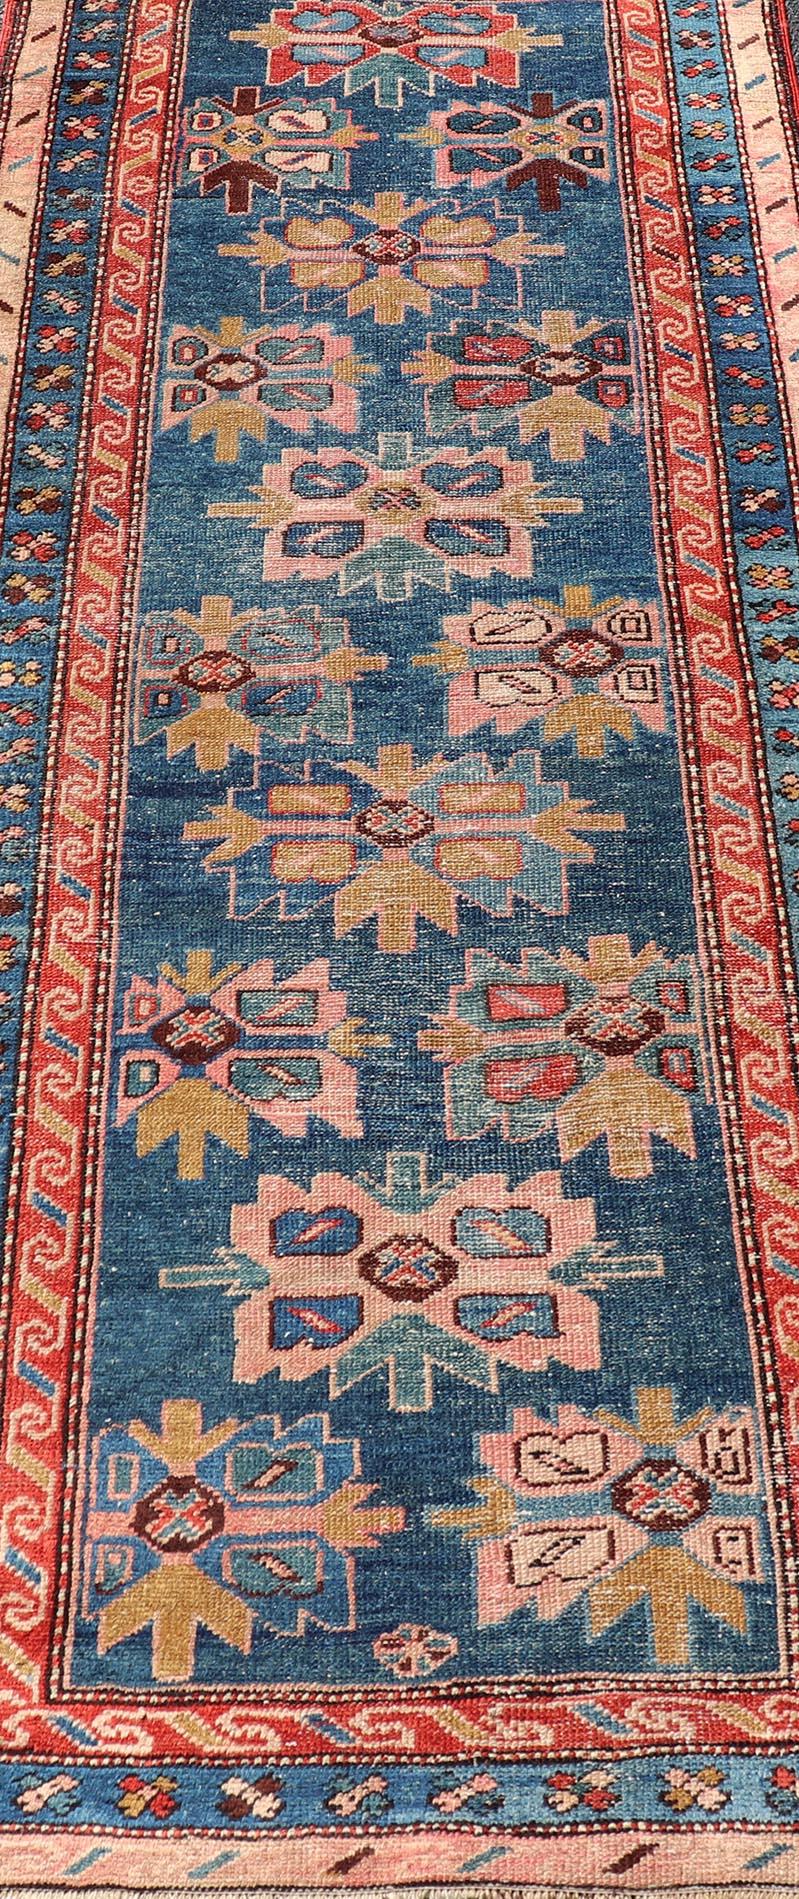 Hand-Knotted Antique Persian Kurdish Tribal Runner in All-Over Sub-Geometric Design